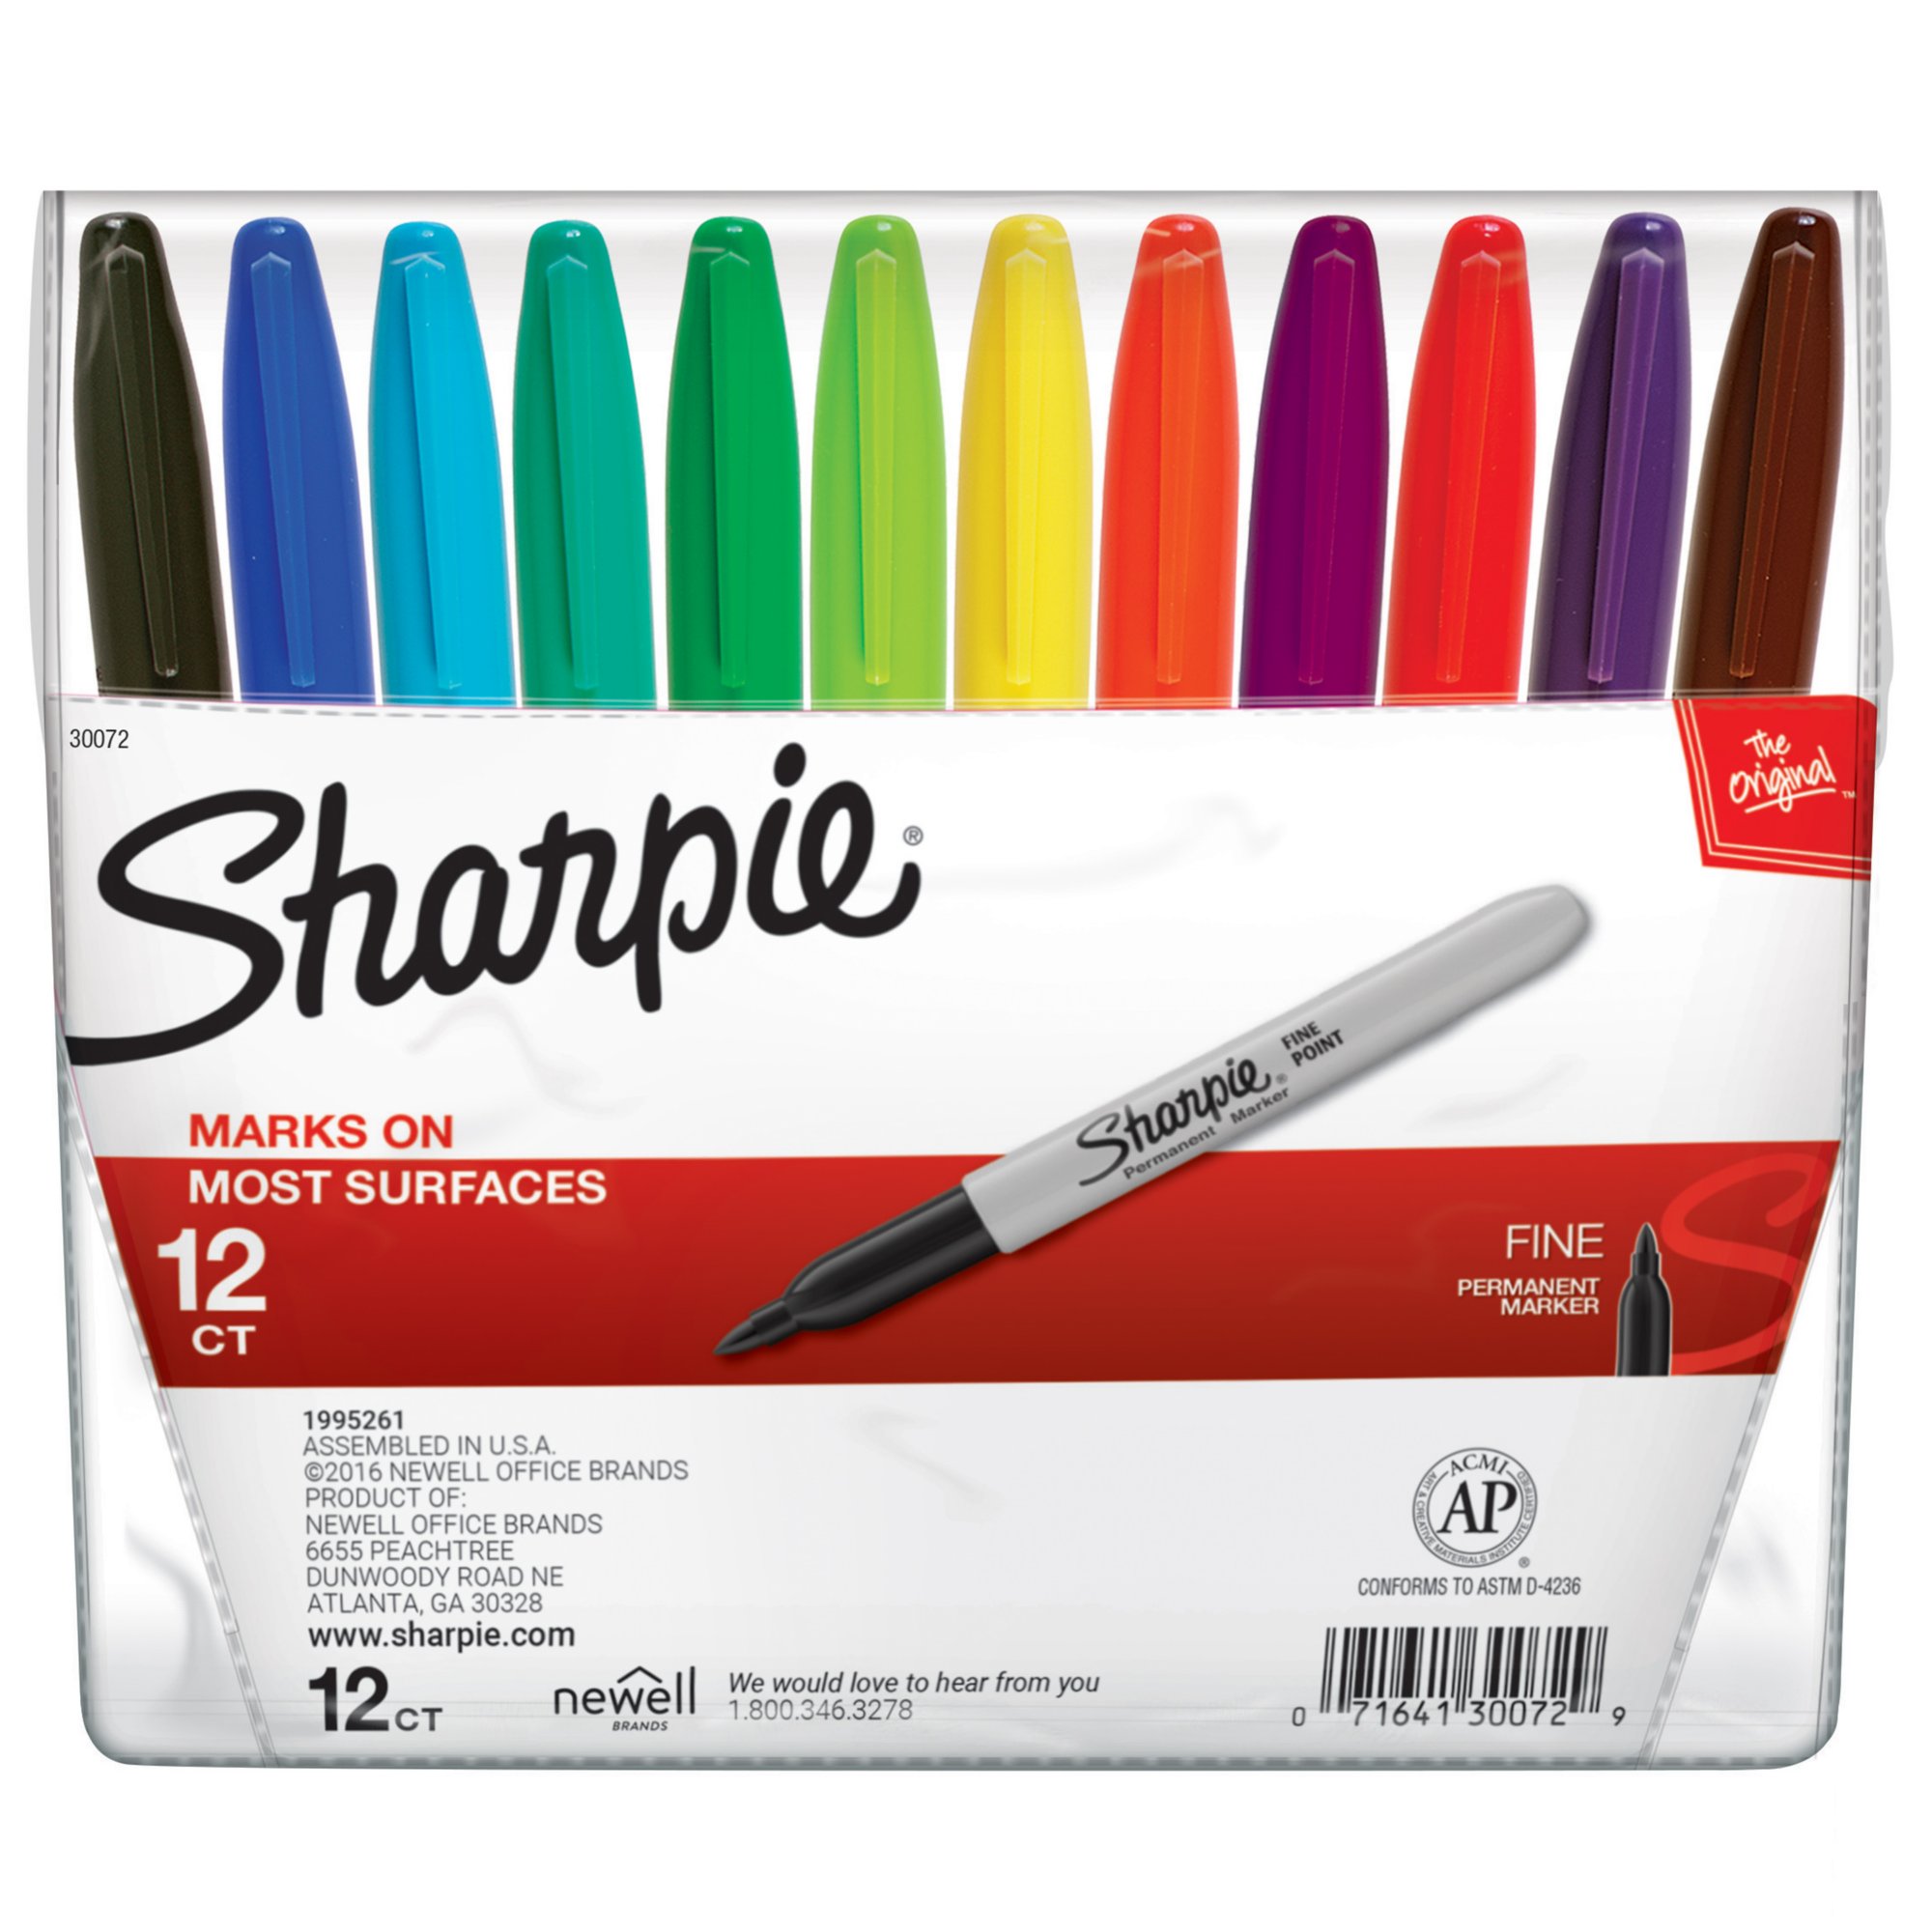 Can anyone help me source these older model fine-point Sharpies? : r/pens